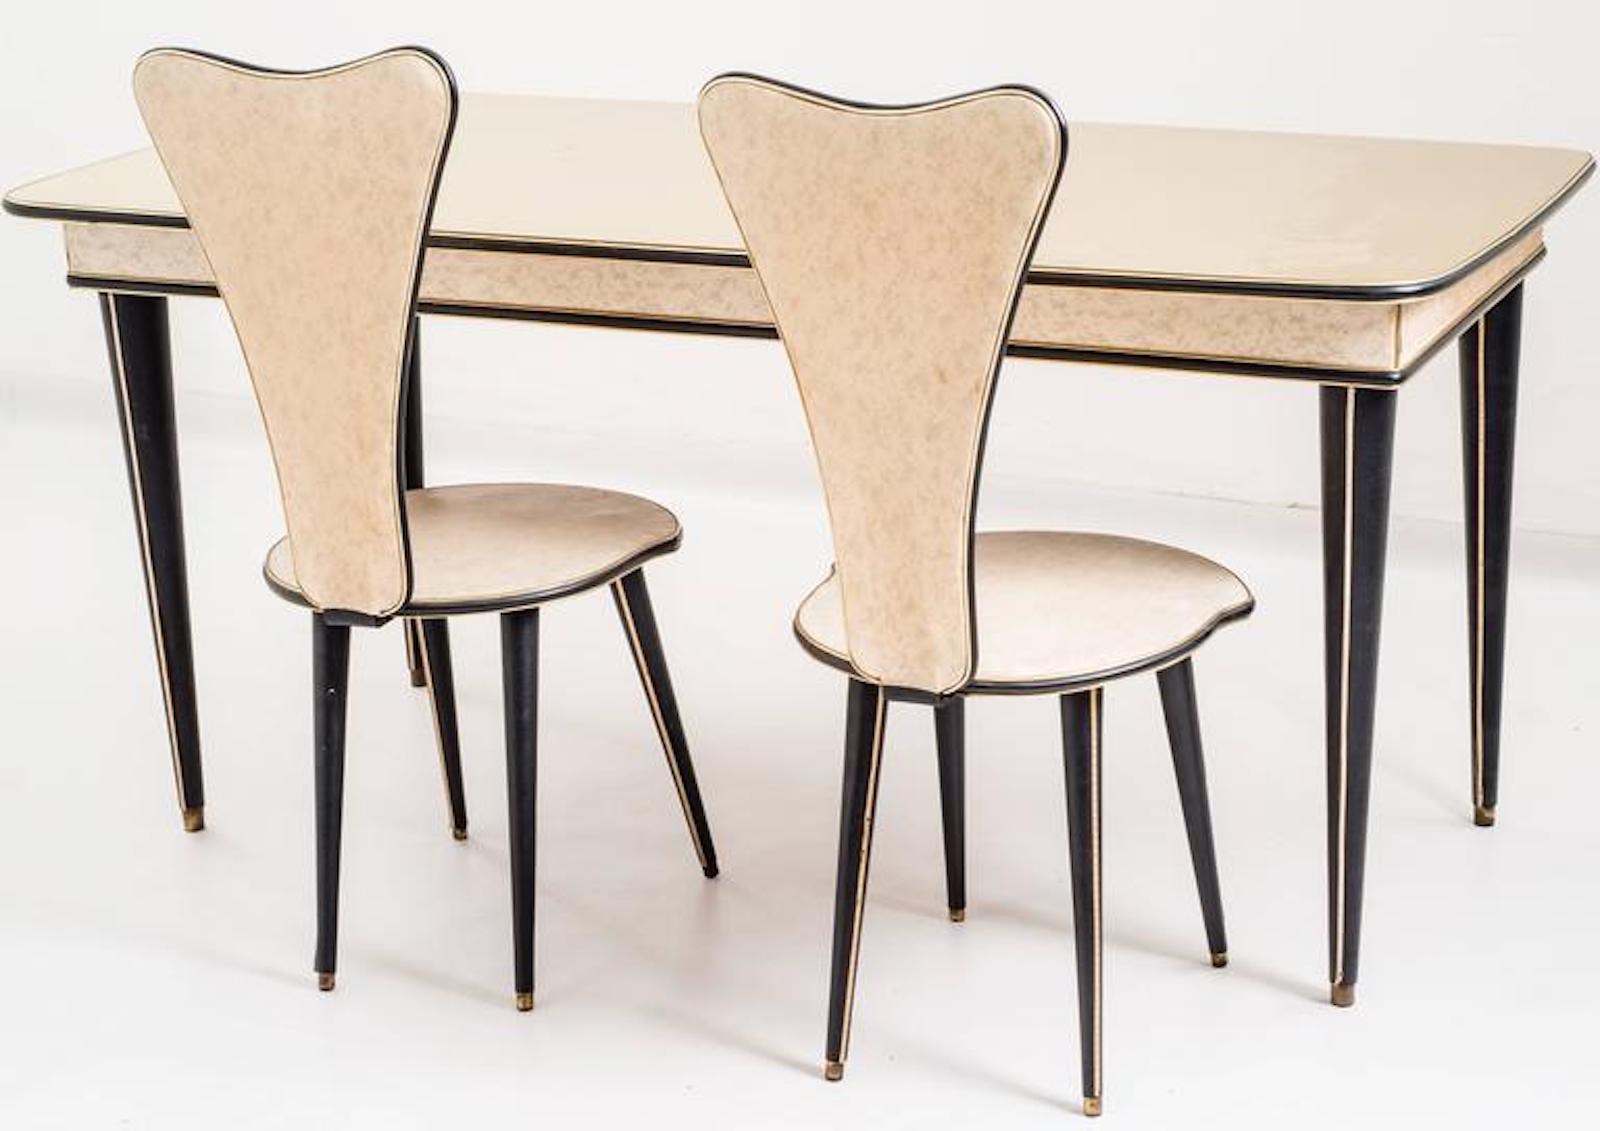 Set of Six Chairs by Umberto Mascagni, 1950s For Sale 6